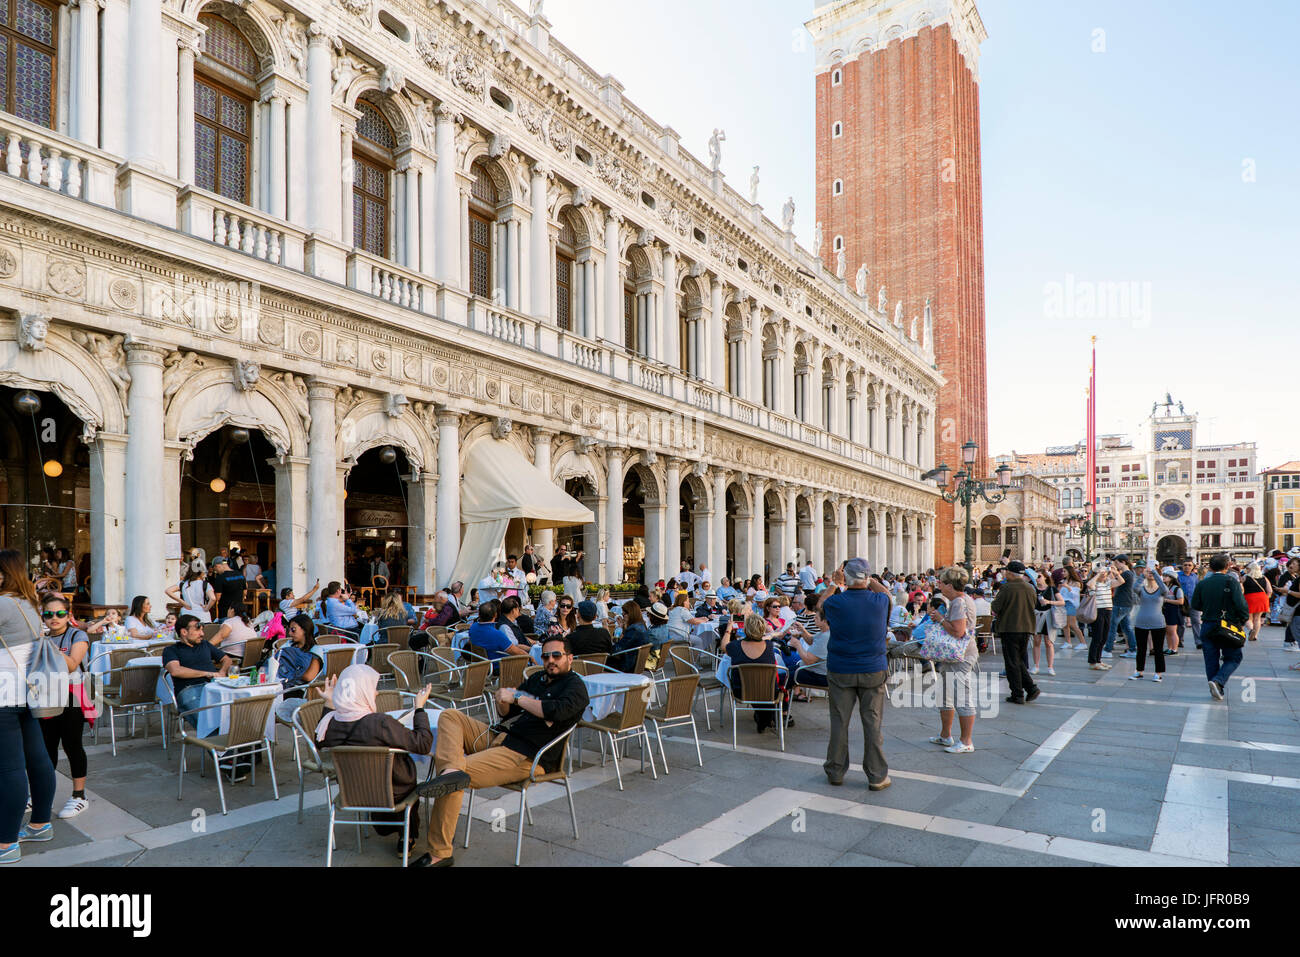 Venice, Veneto / Italy. May 21, 2017: Terraces with people drinking at the Gran Cafe Chioggia in St. Mark's Square Stock Photo